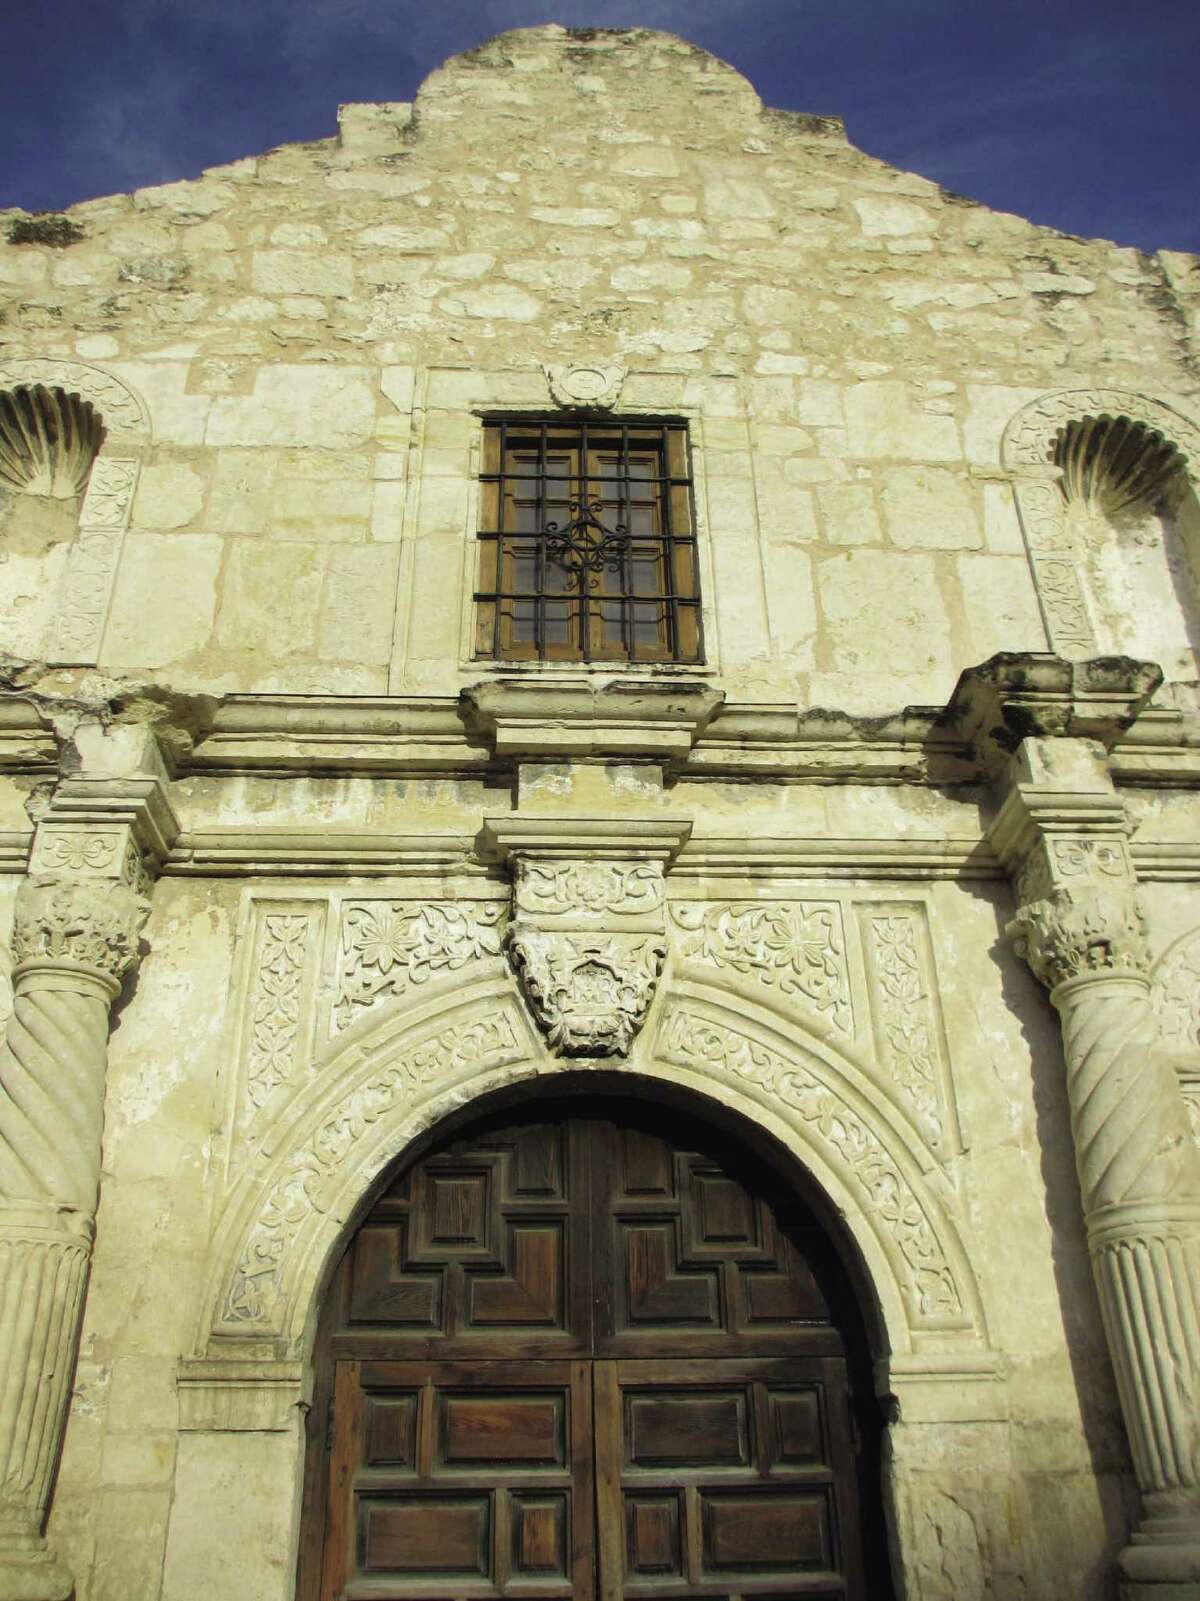 The Alamo church is not “The Alamo” — it's only what's left.